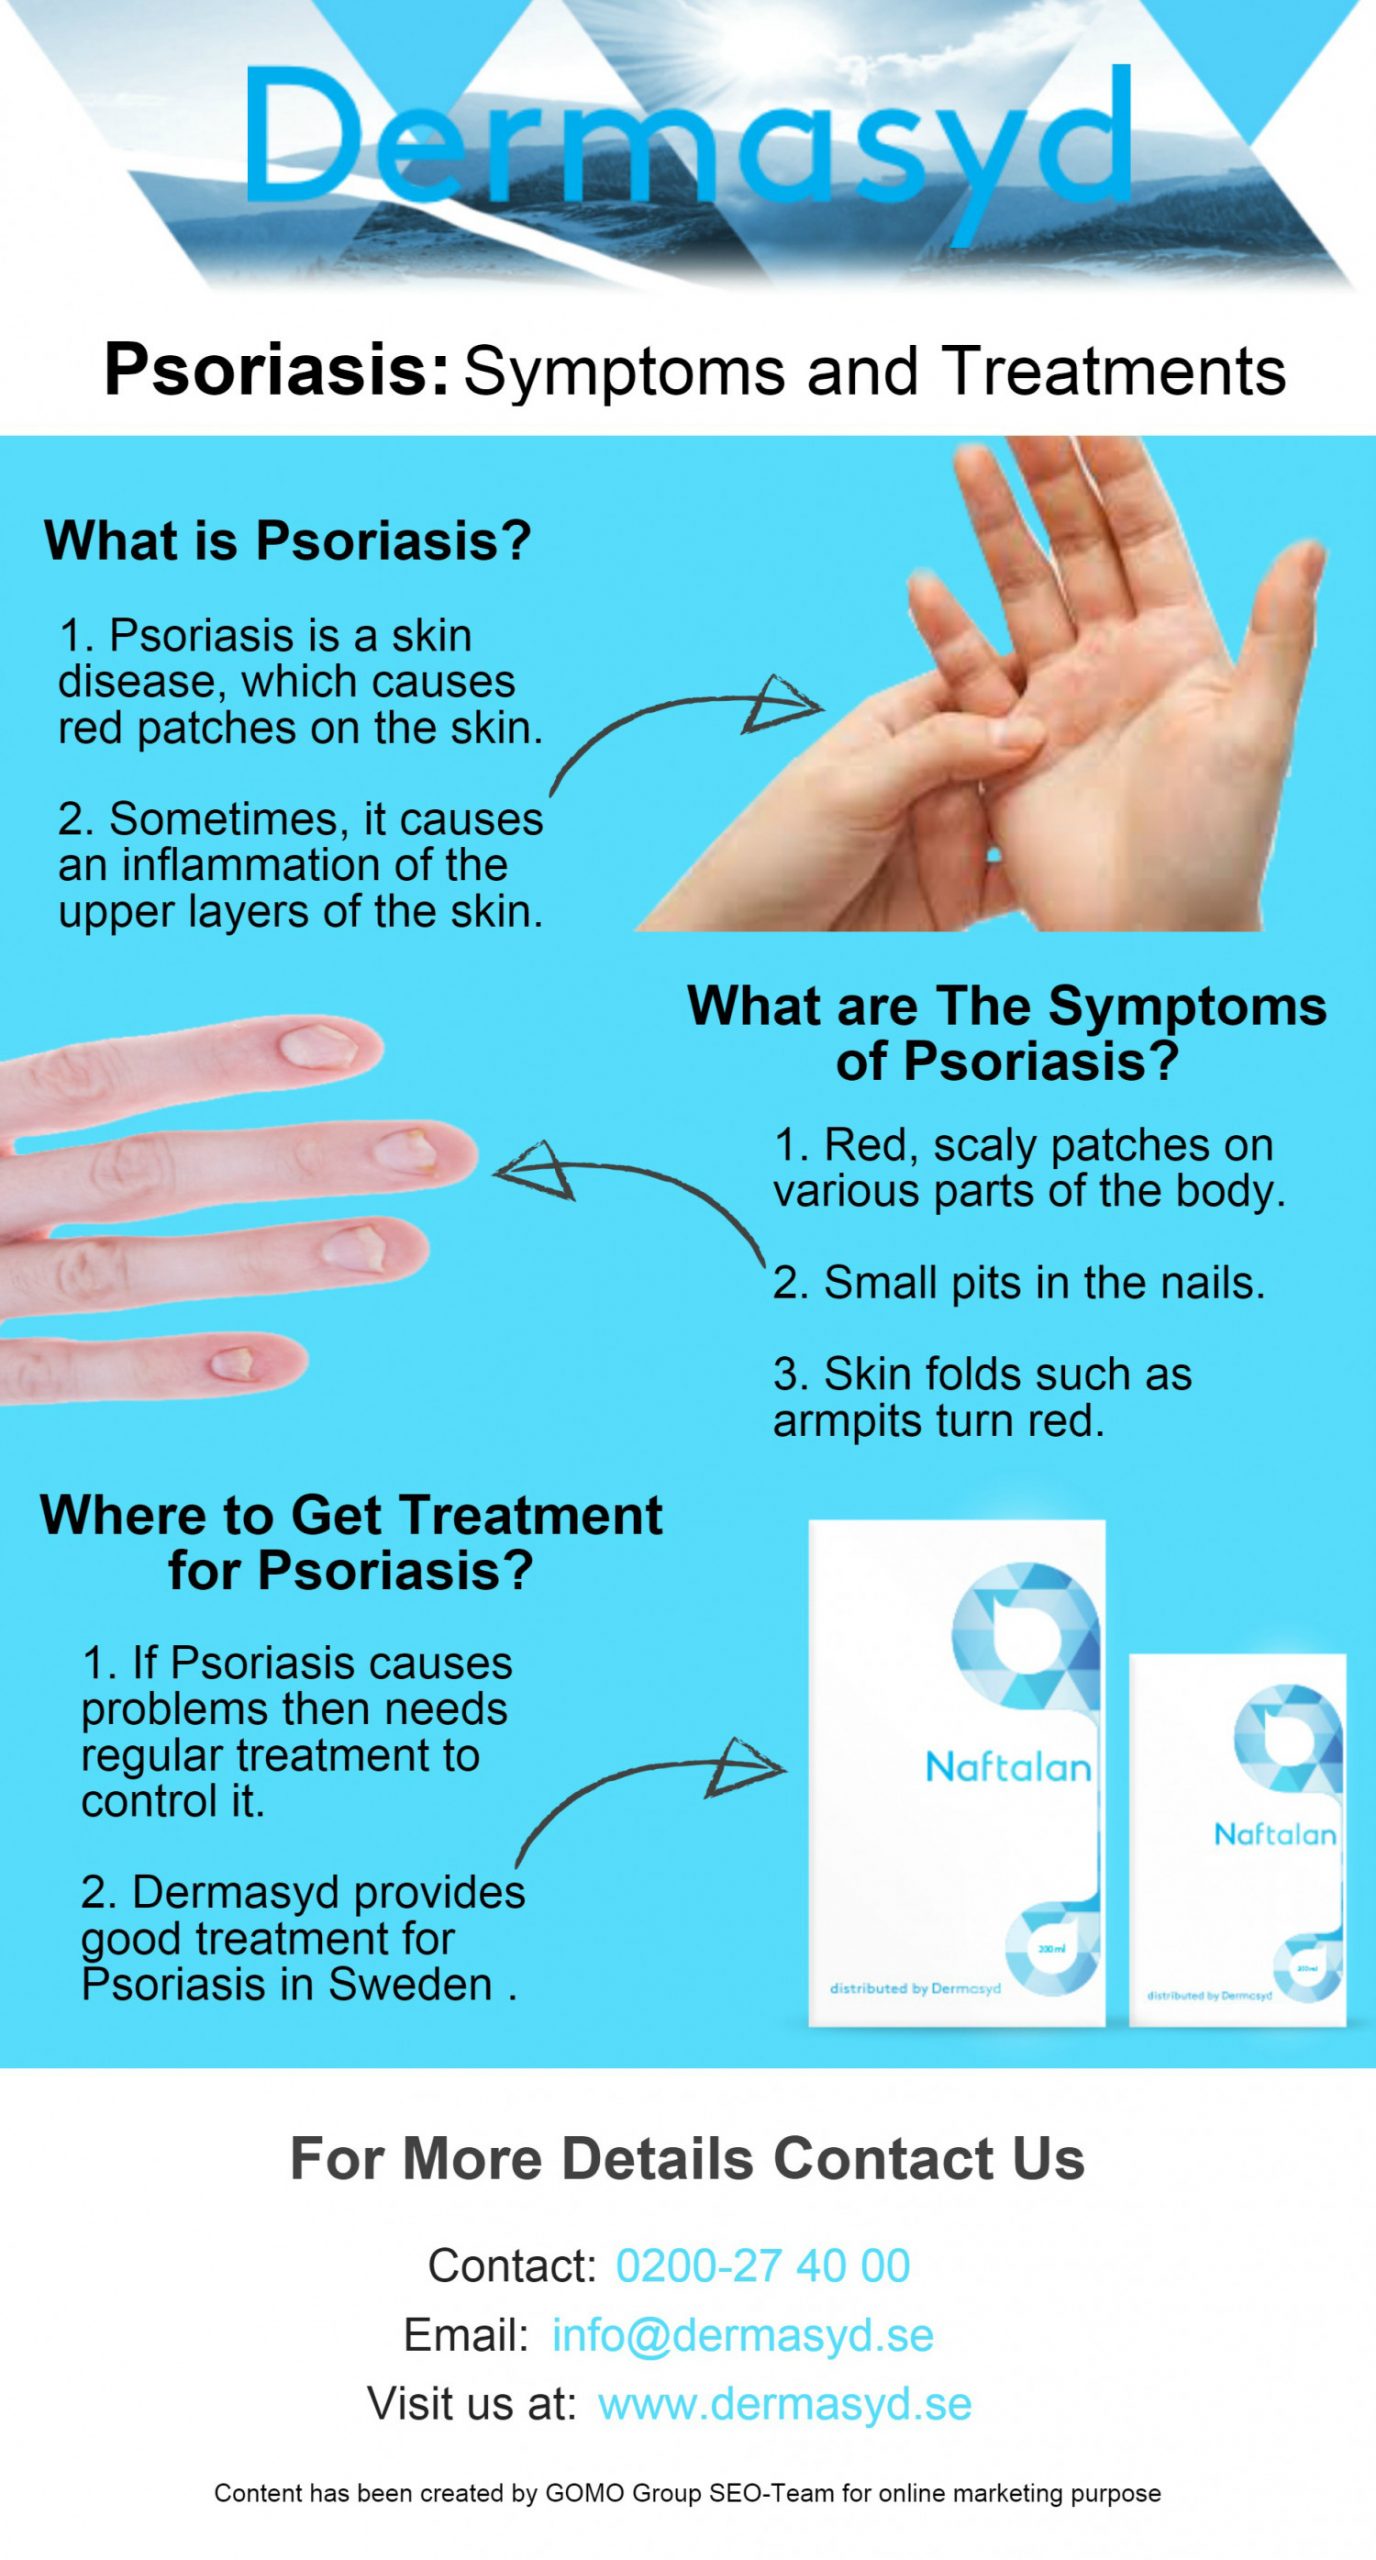 Psoriasis: Symptoms and Treatment Infographic